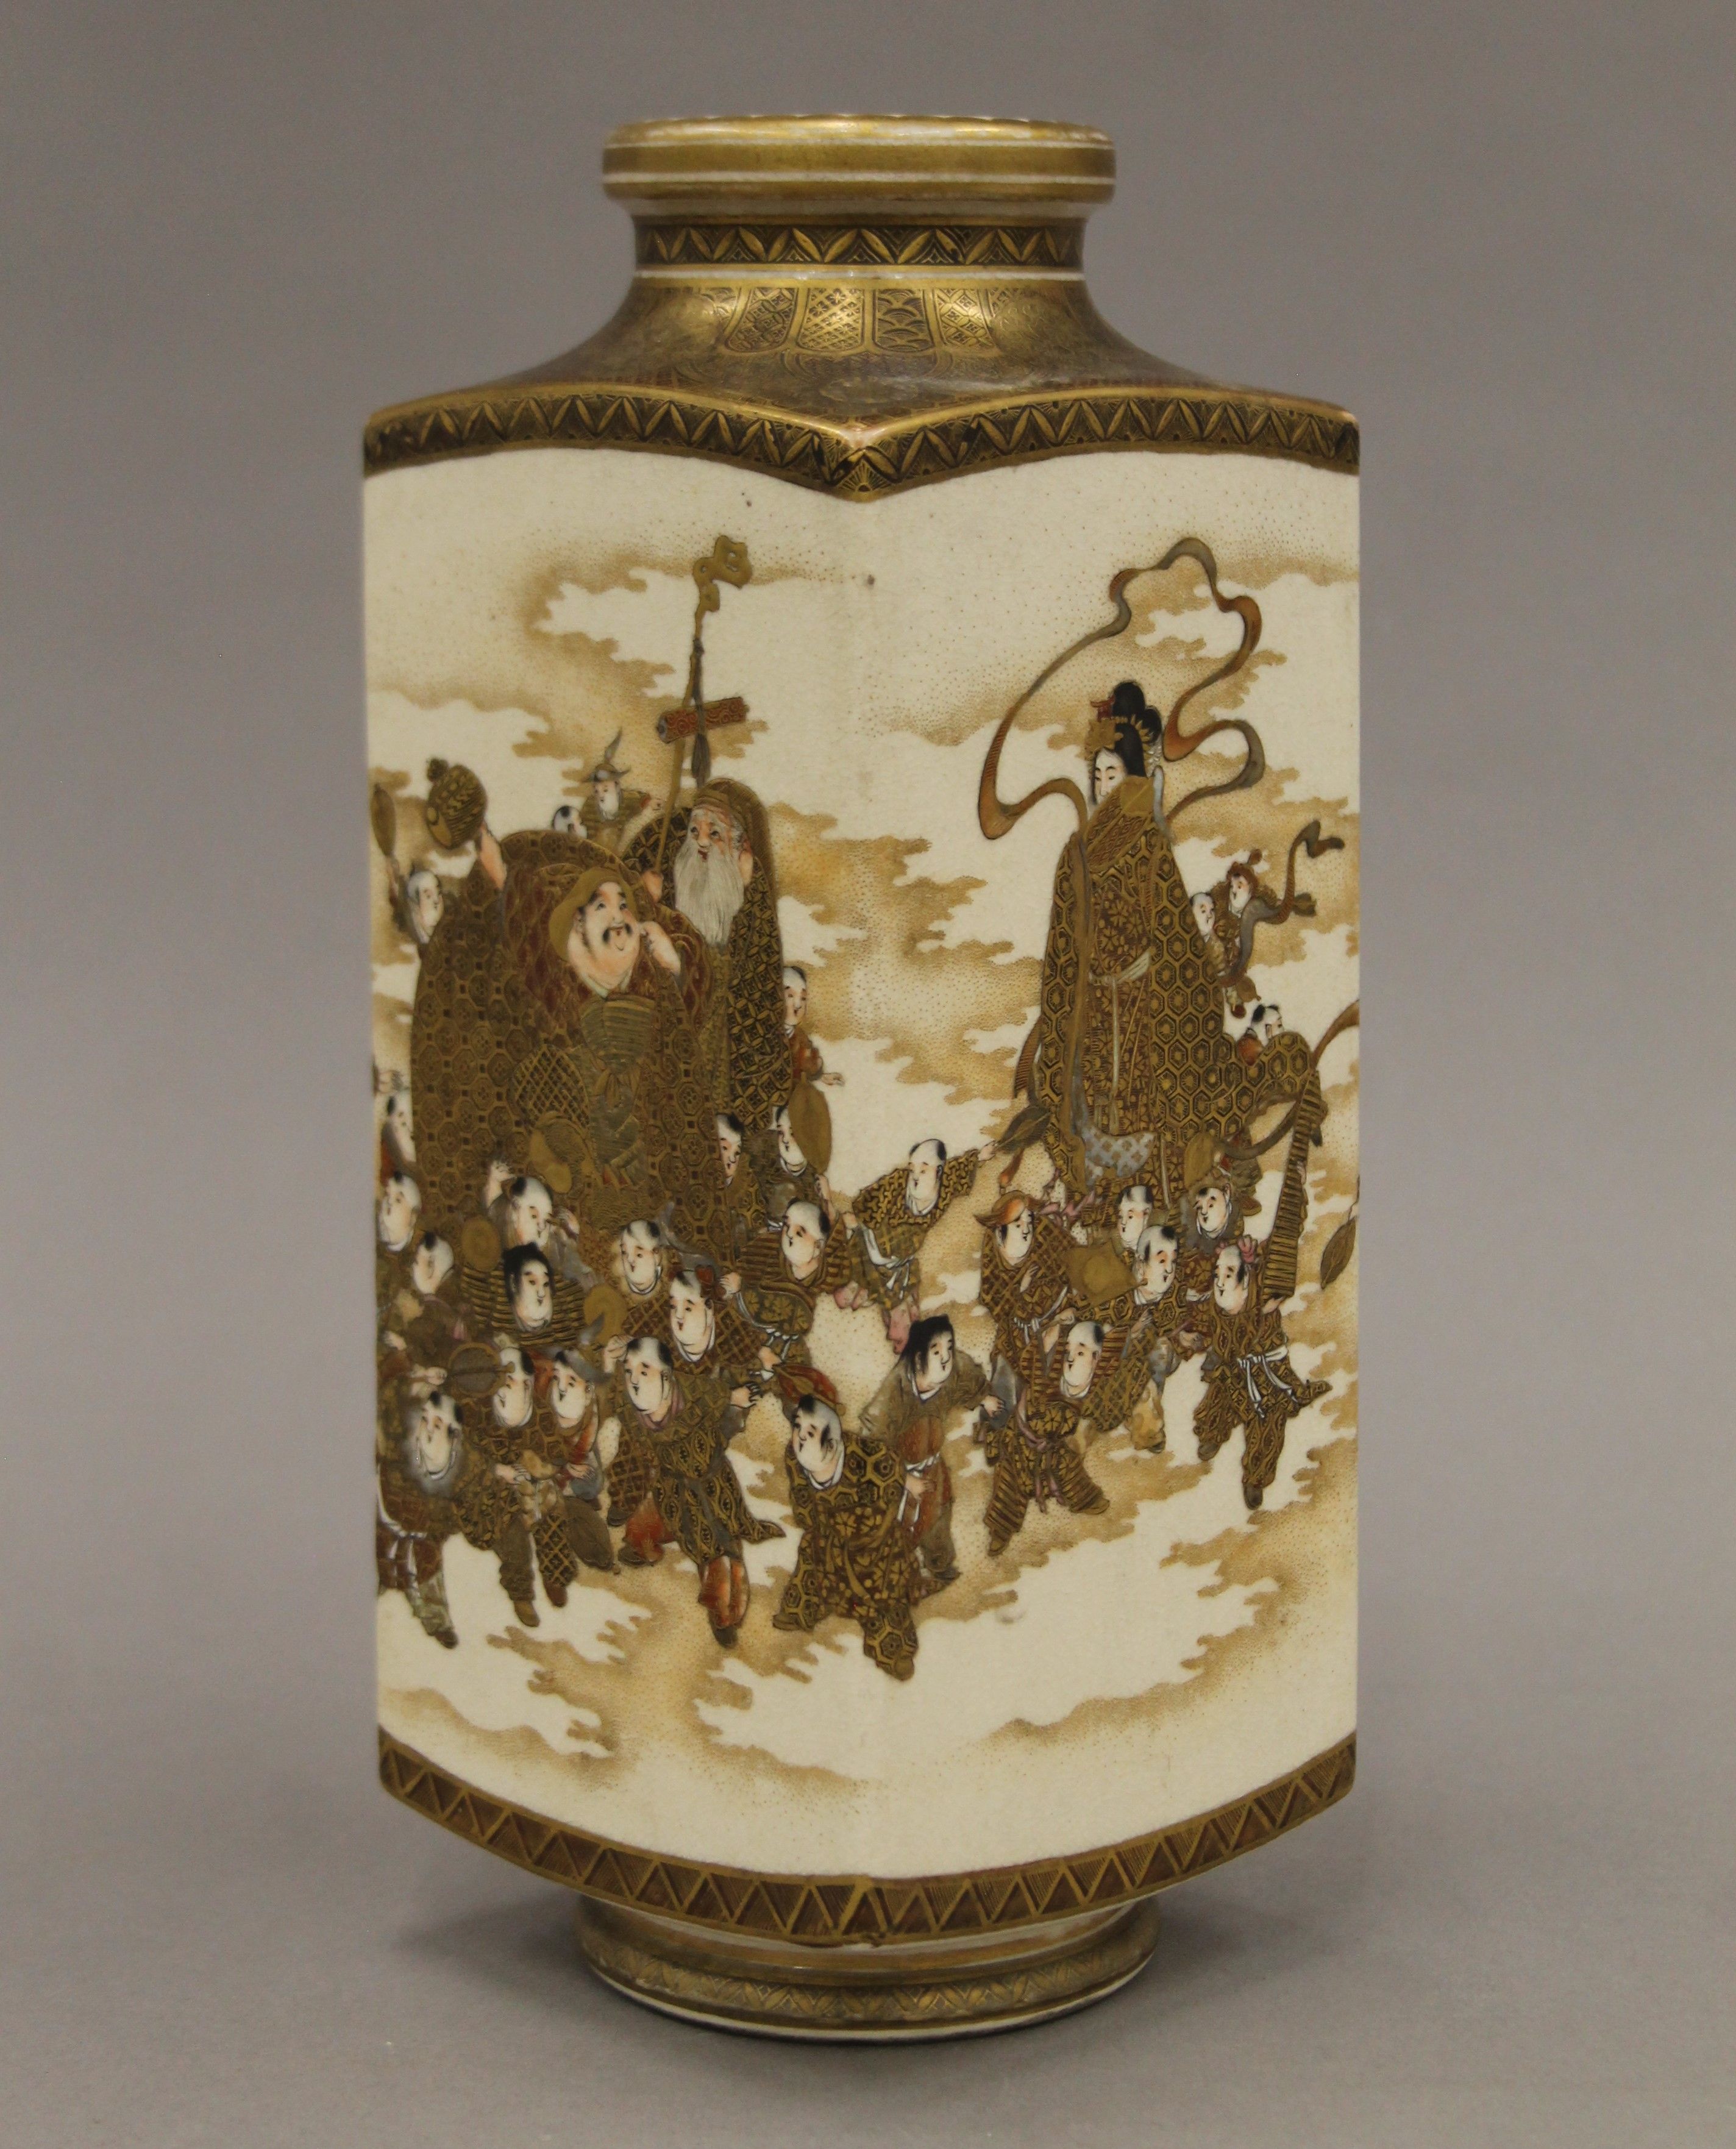 A 19th century Satsuma vase decorated with various figures in a procession. 25 cm high. - Image 3 of 7